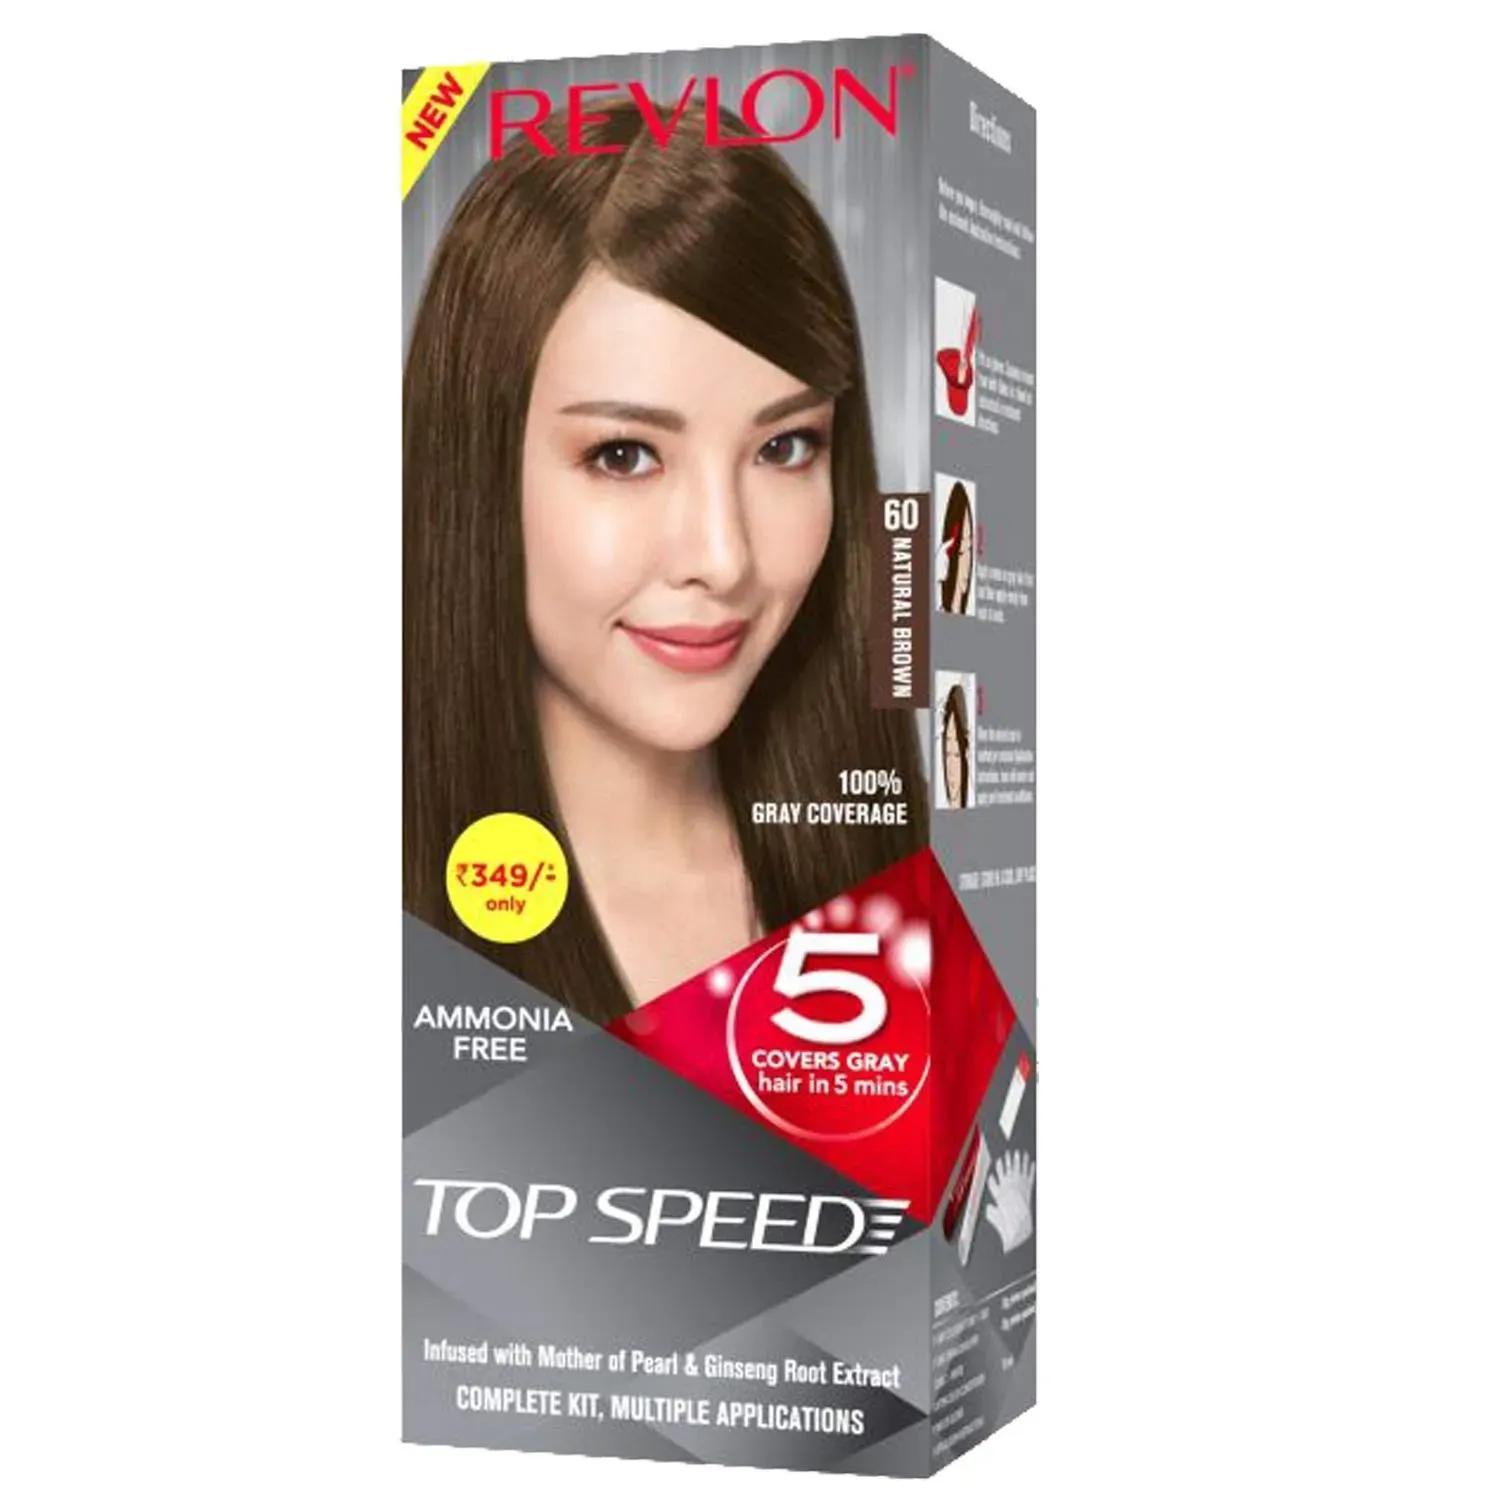 revlon top speed hair color small pack for woman - 60 natural brown (40g+15ml)